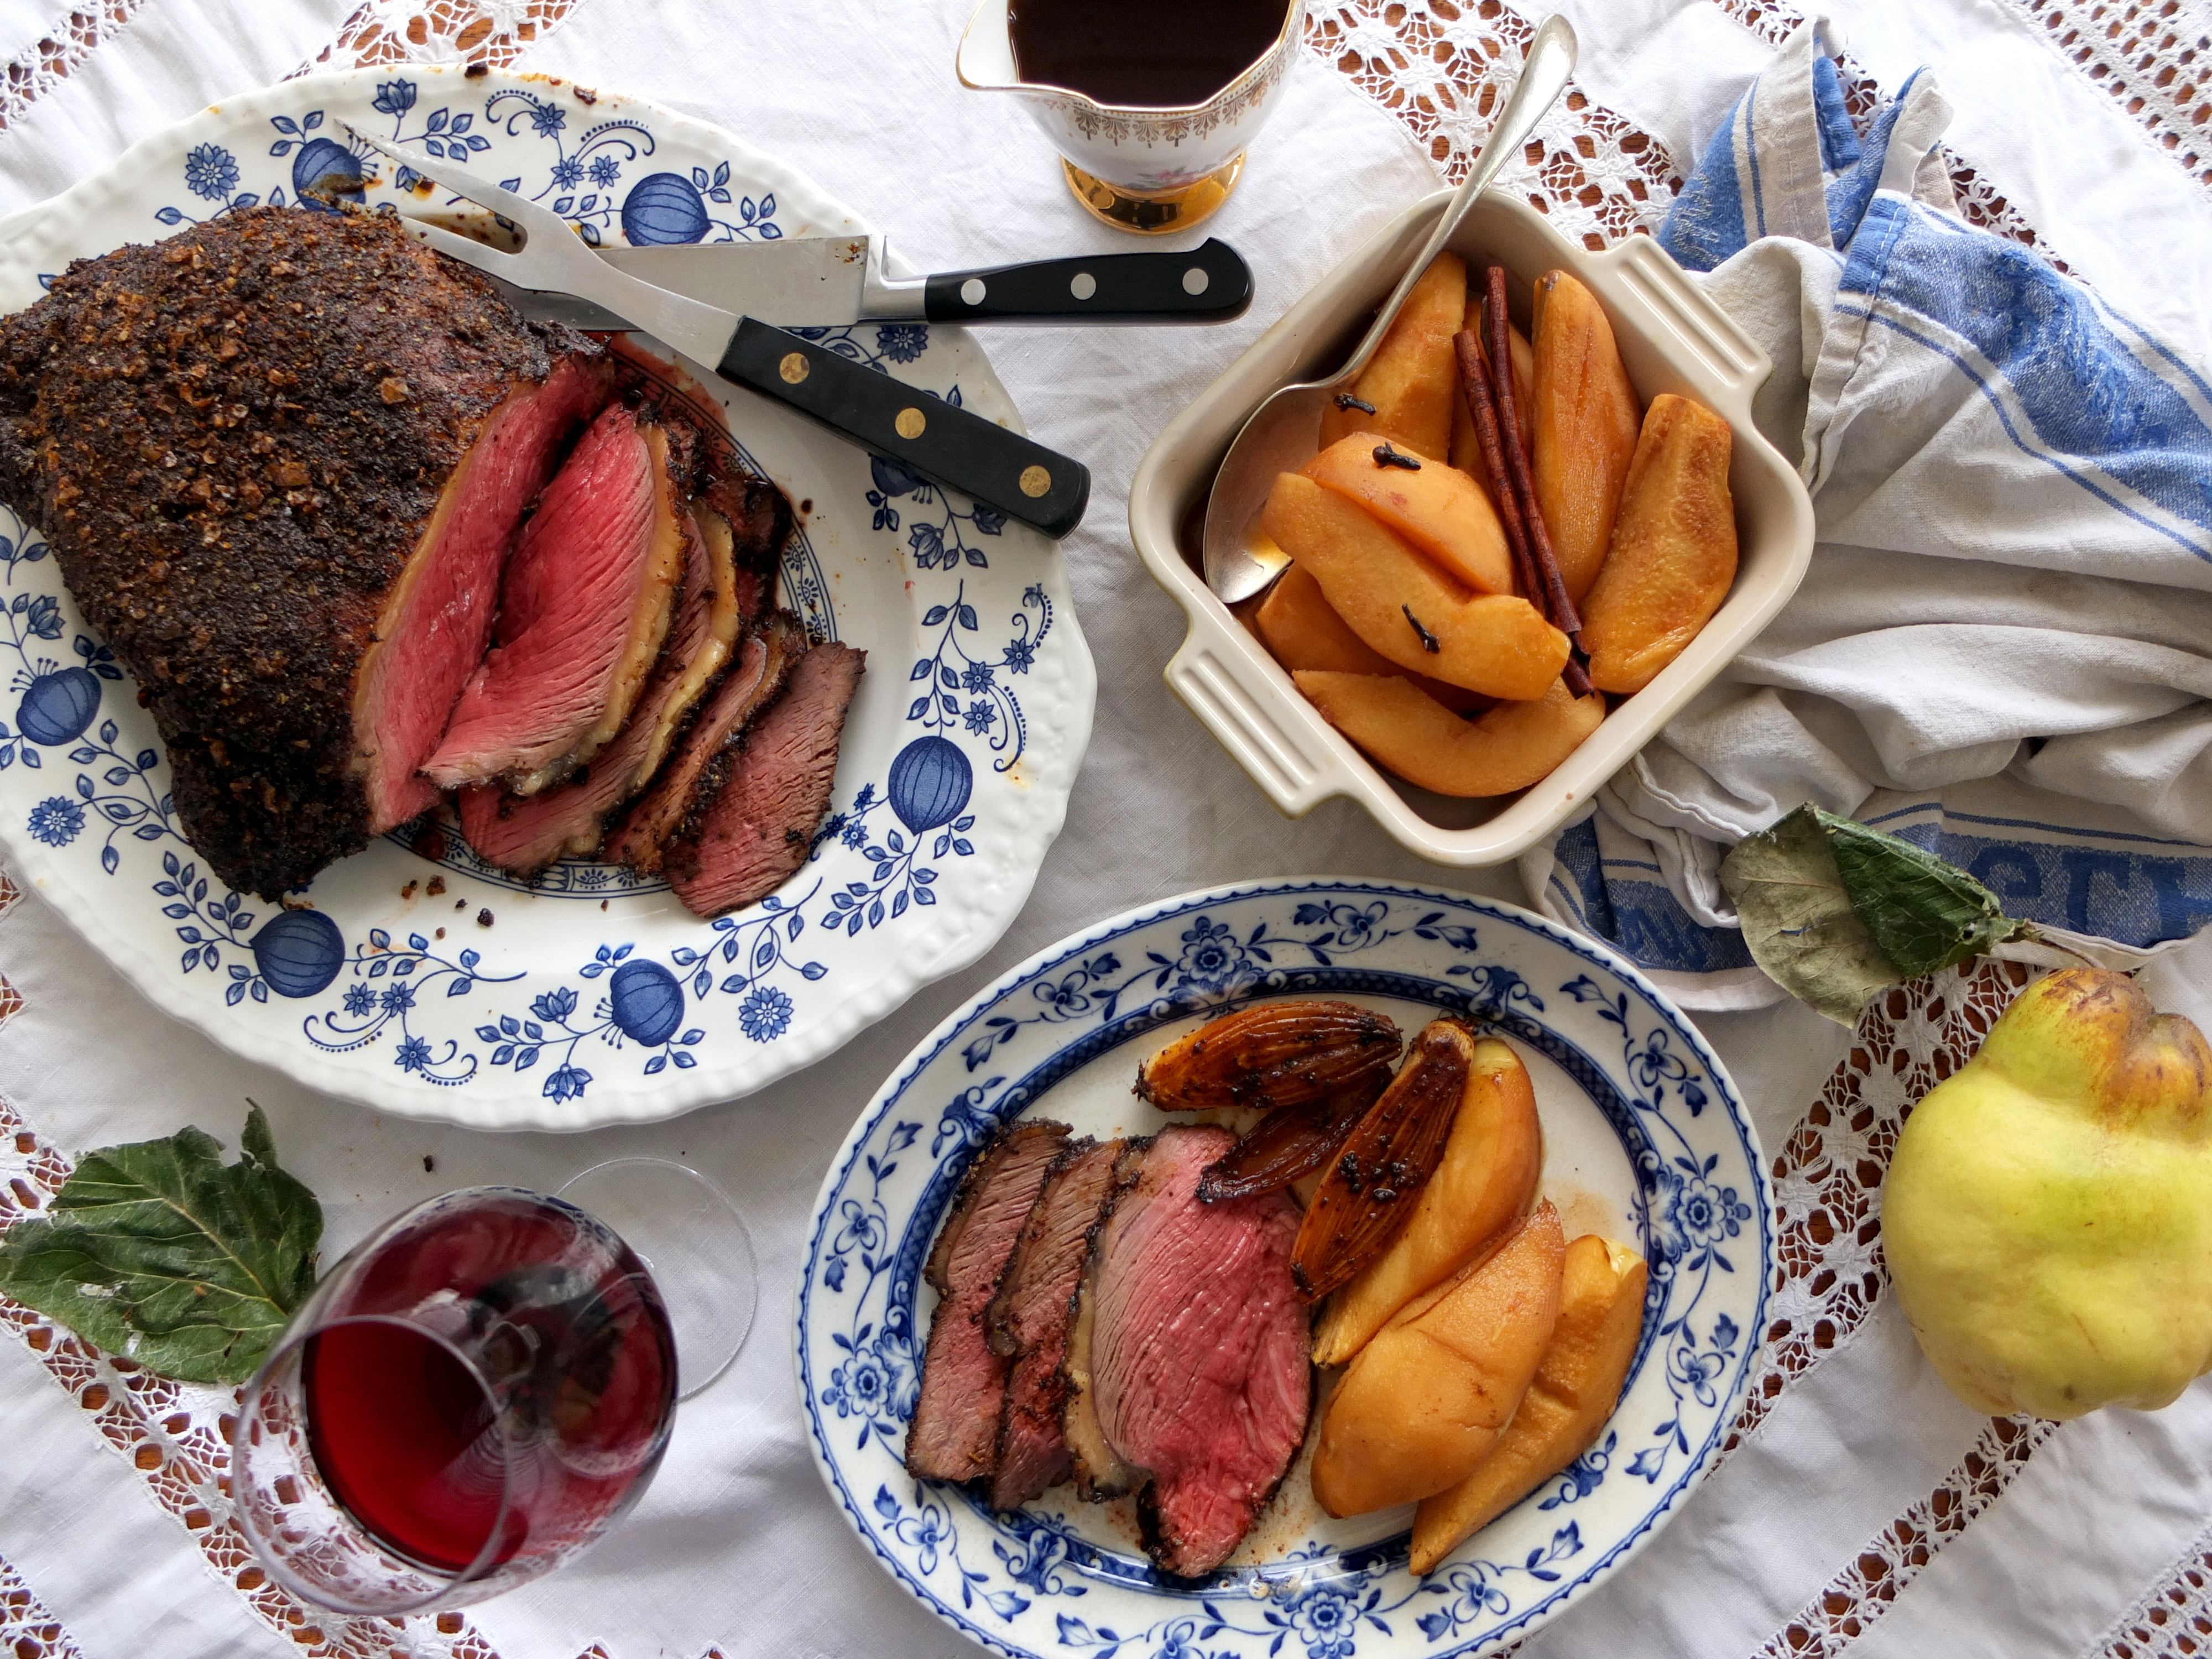 How To Cook Rump Steak To Perfection Great British Chefs